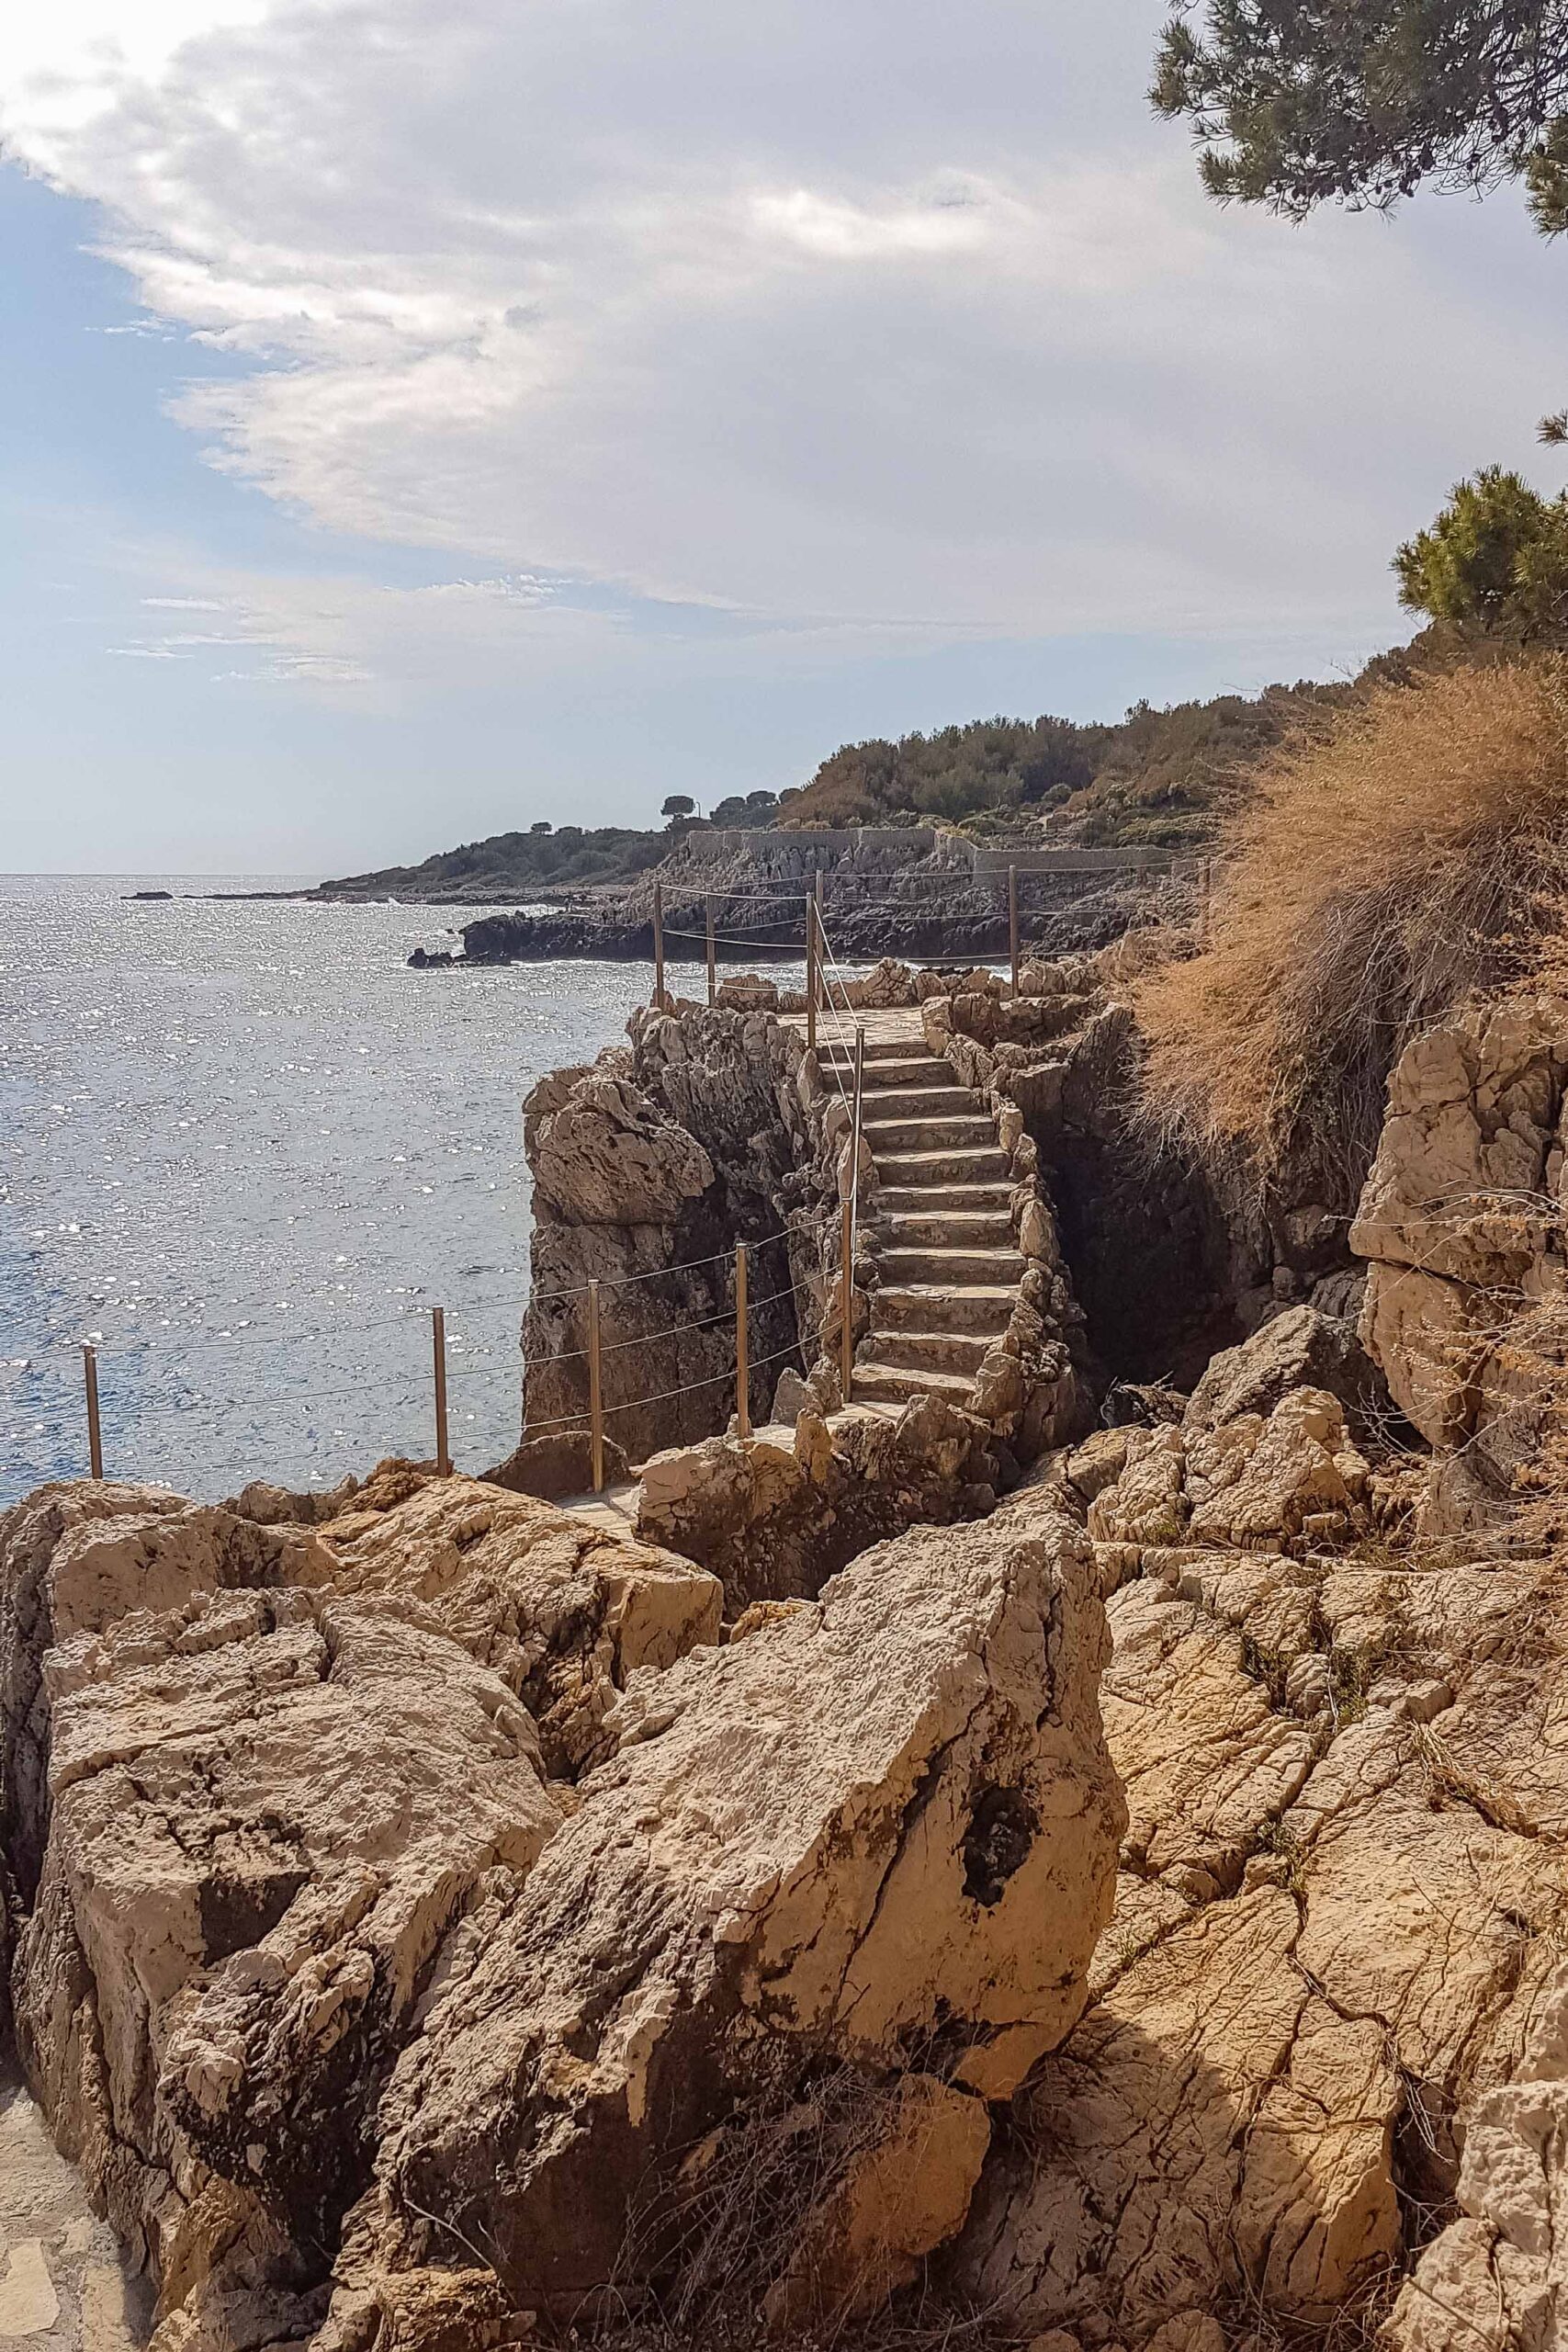 Staircase, rocks, and view of the Mediterranean Sea along the Sentier du Littoral hiking trail during a sunny day in Antibes, France